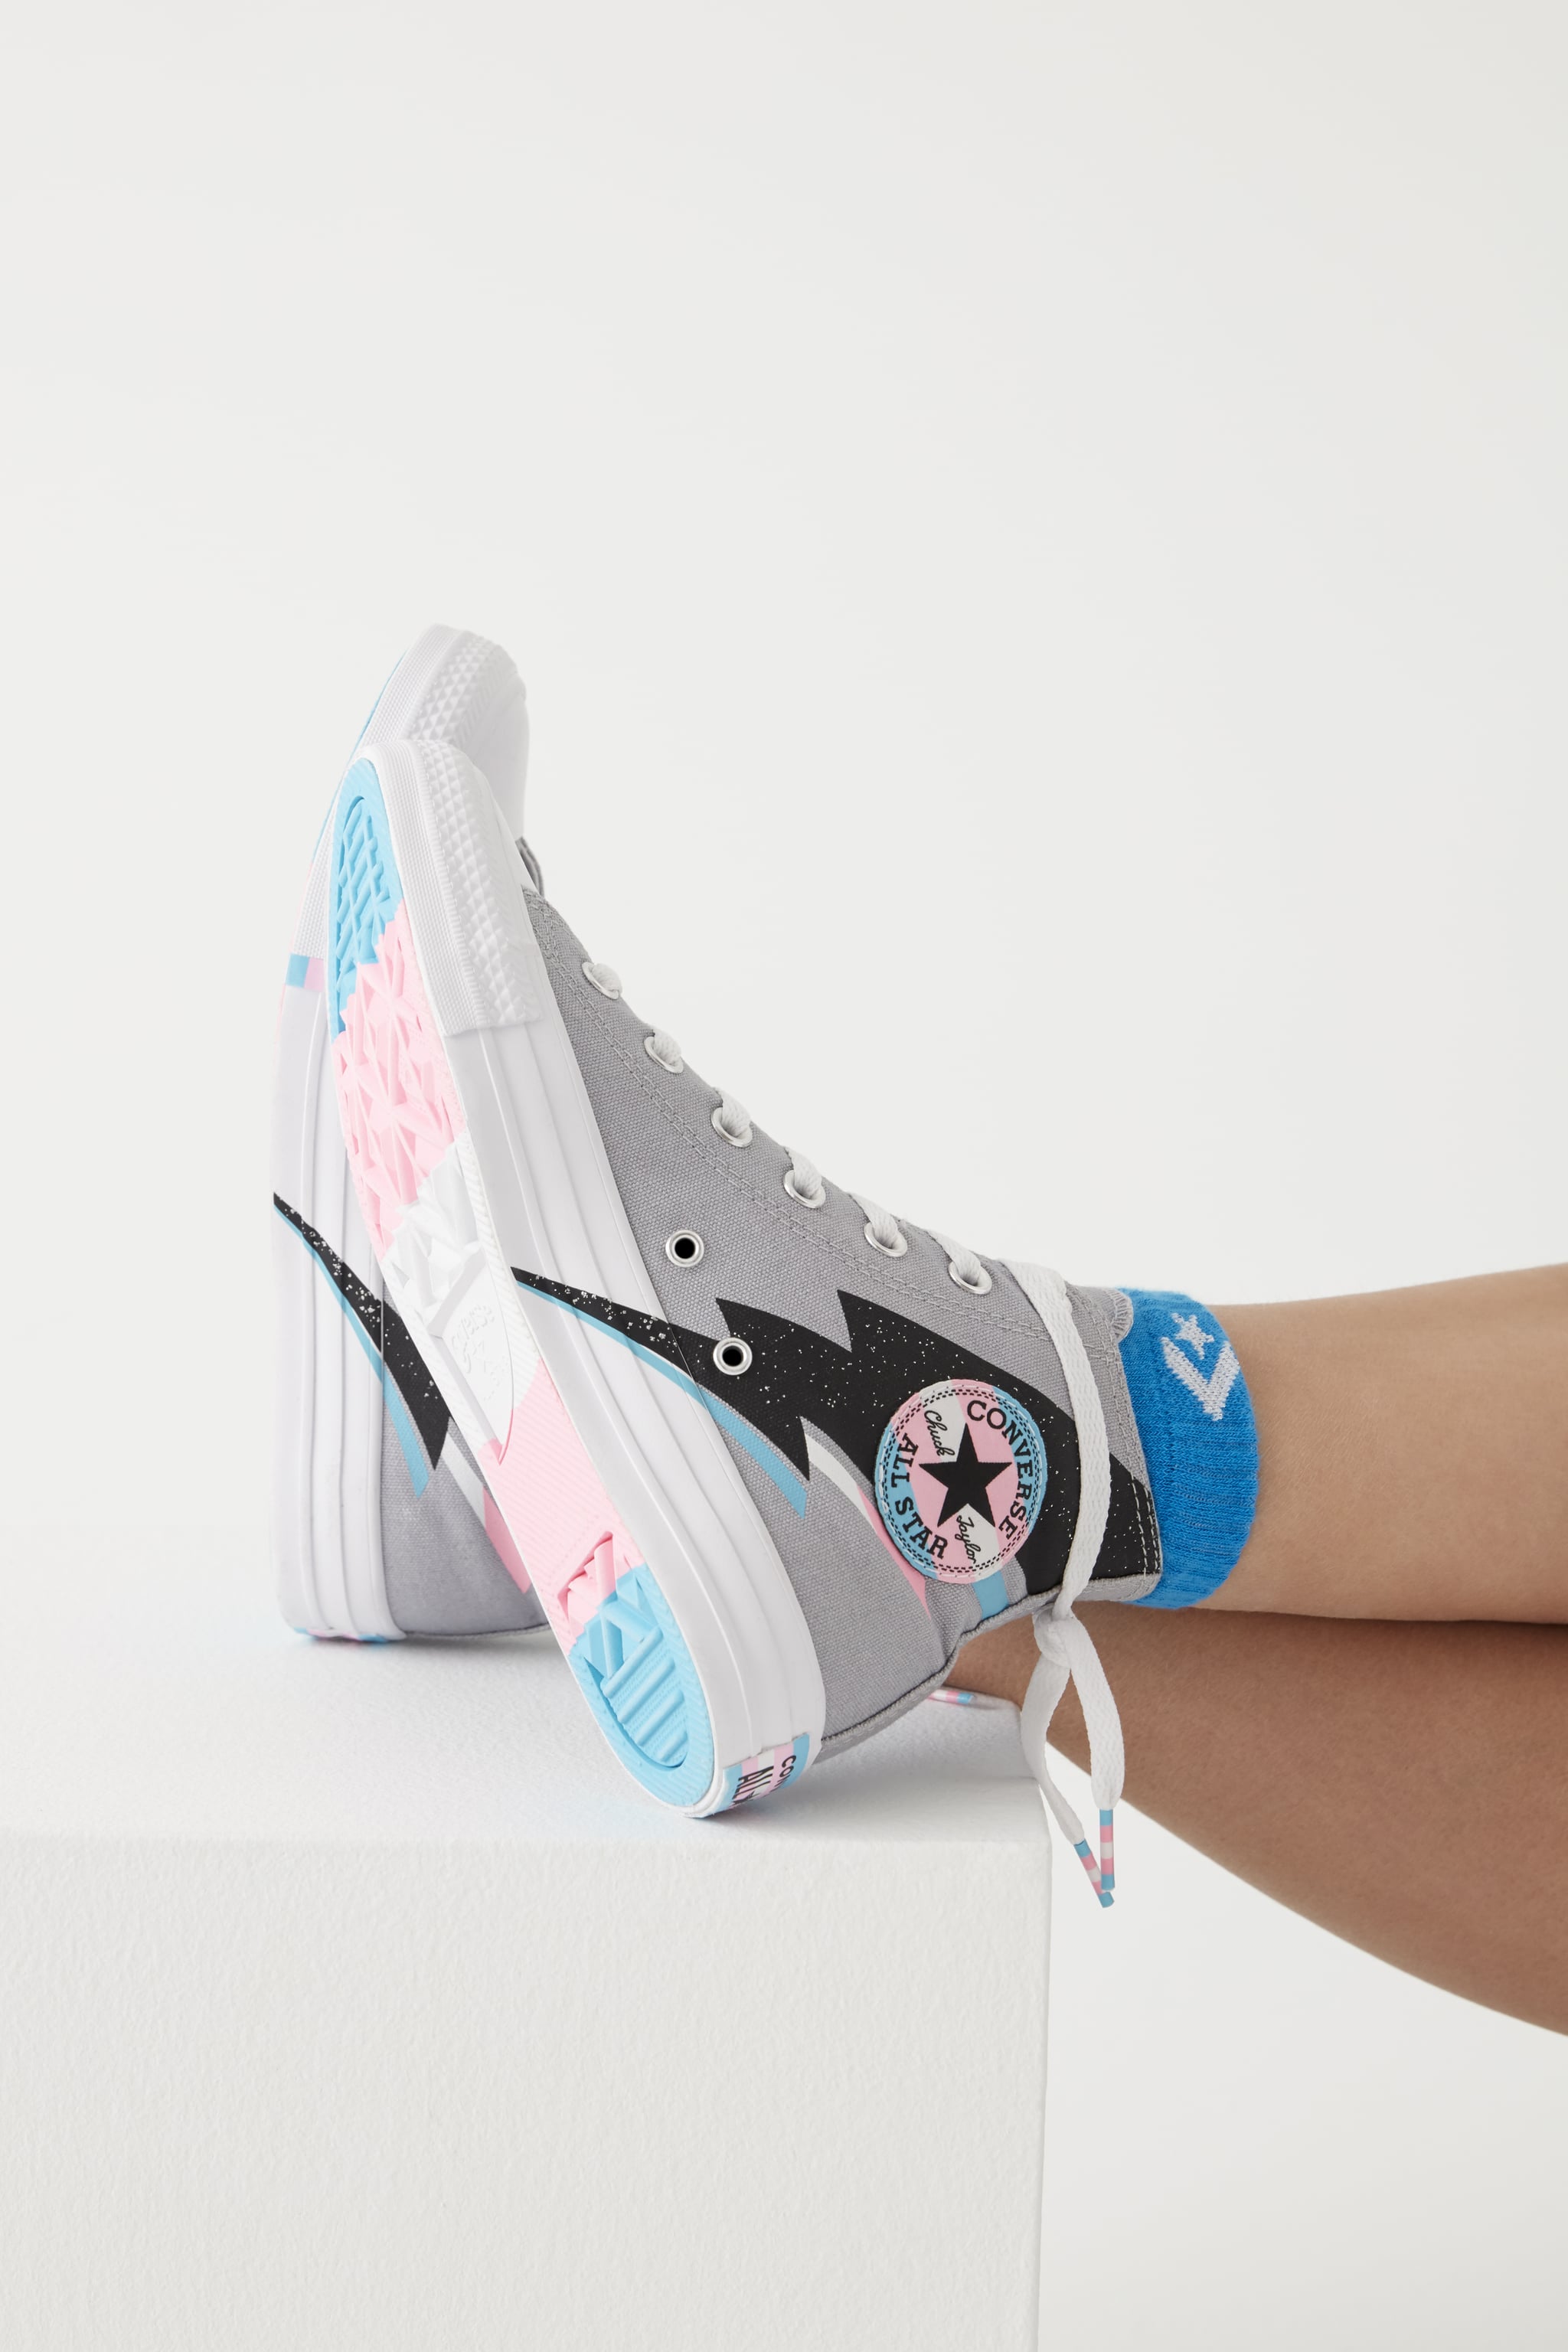 Converse Pride Sneakers Collection 2019 